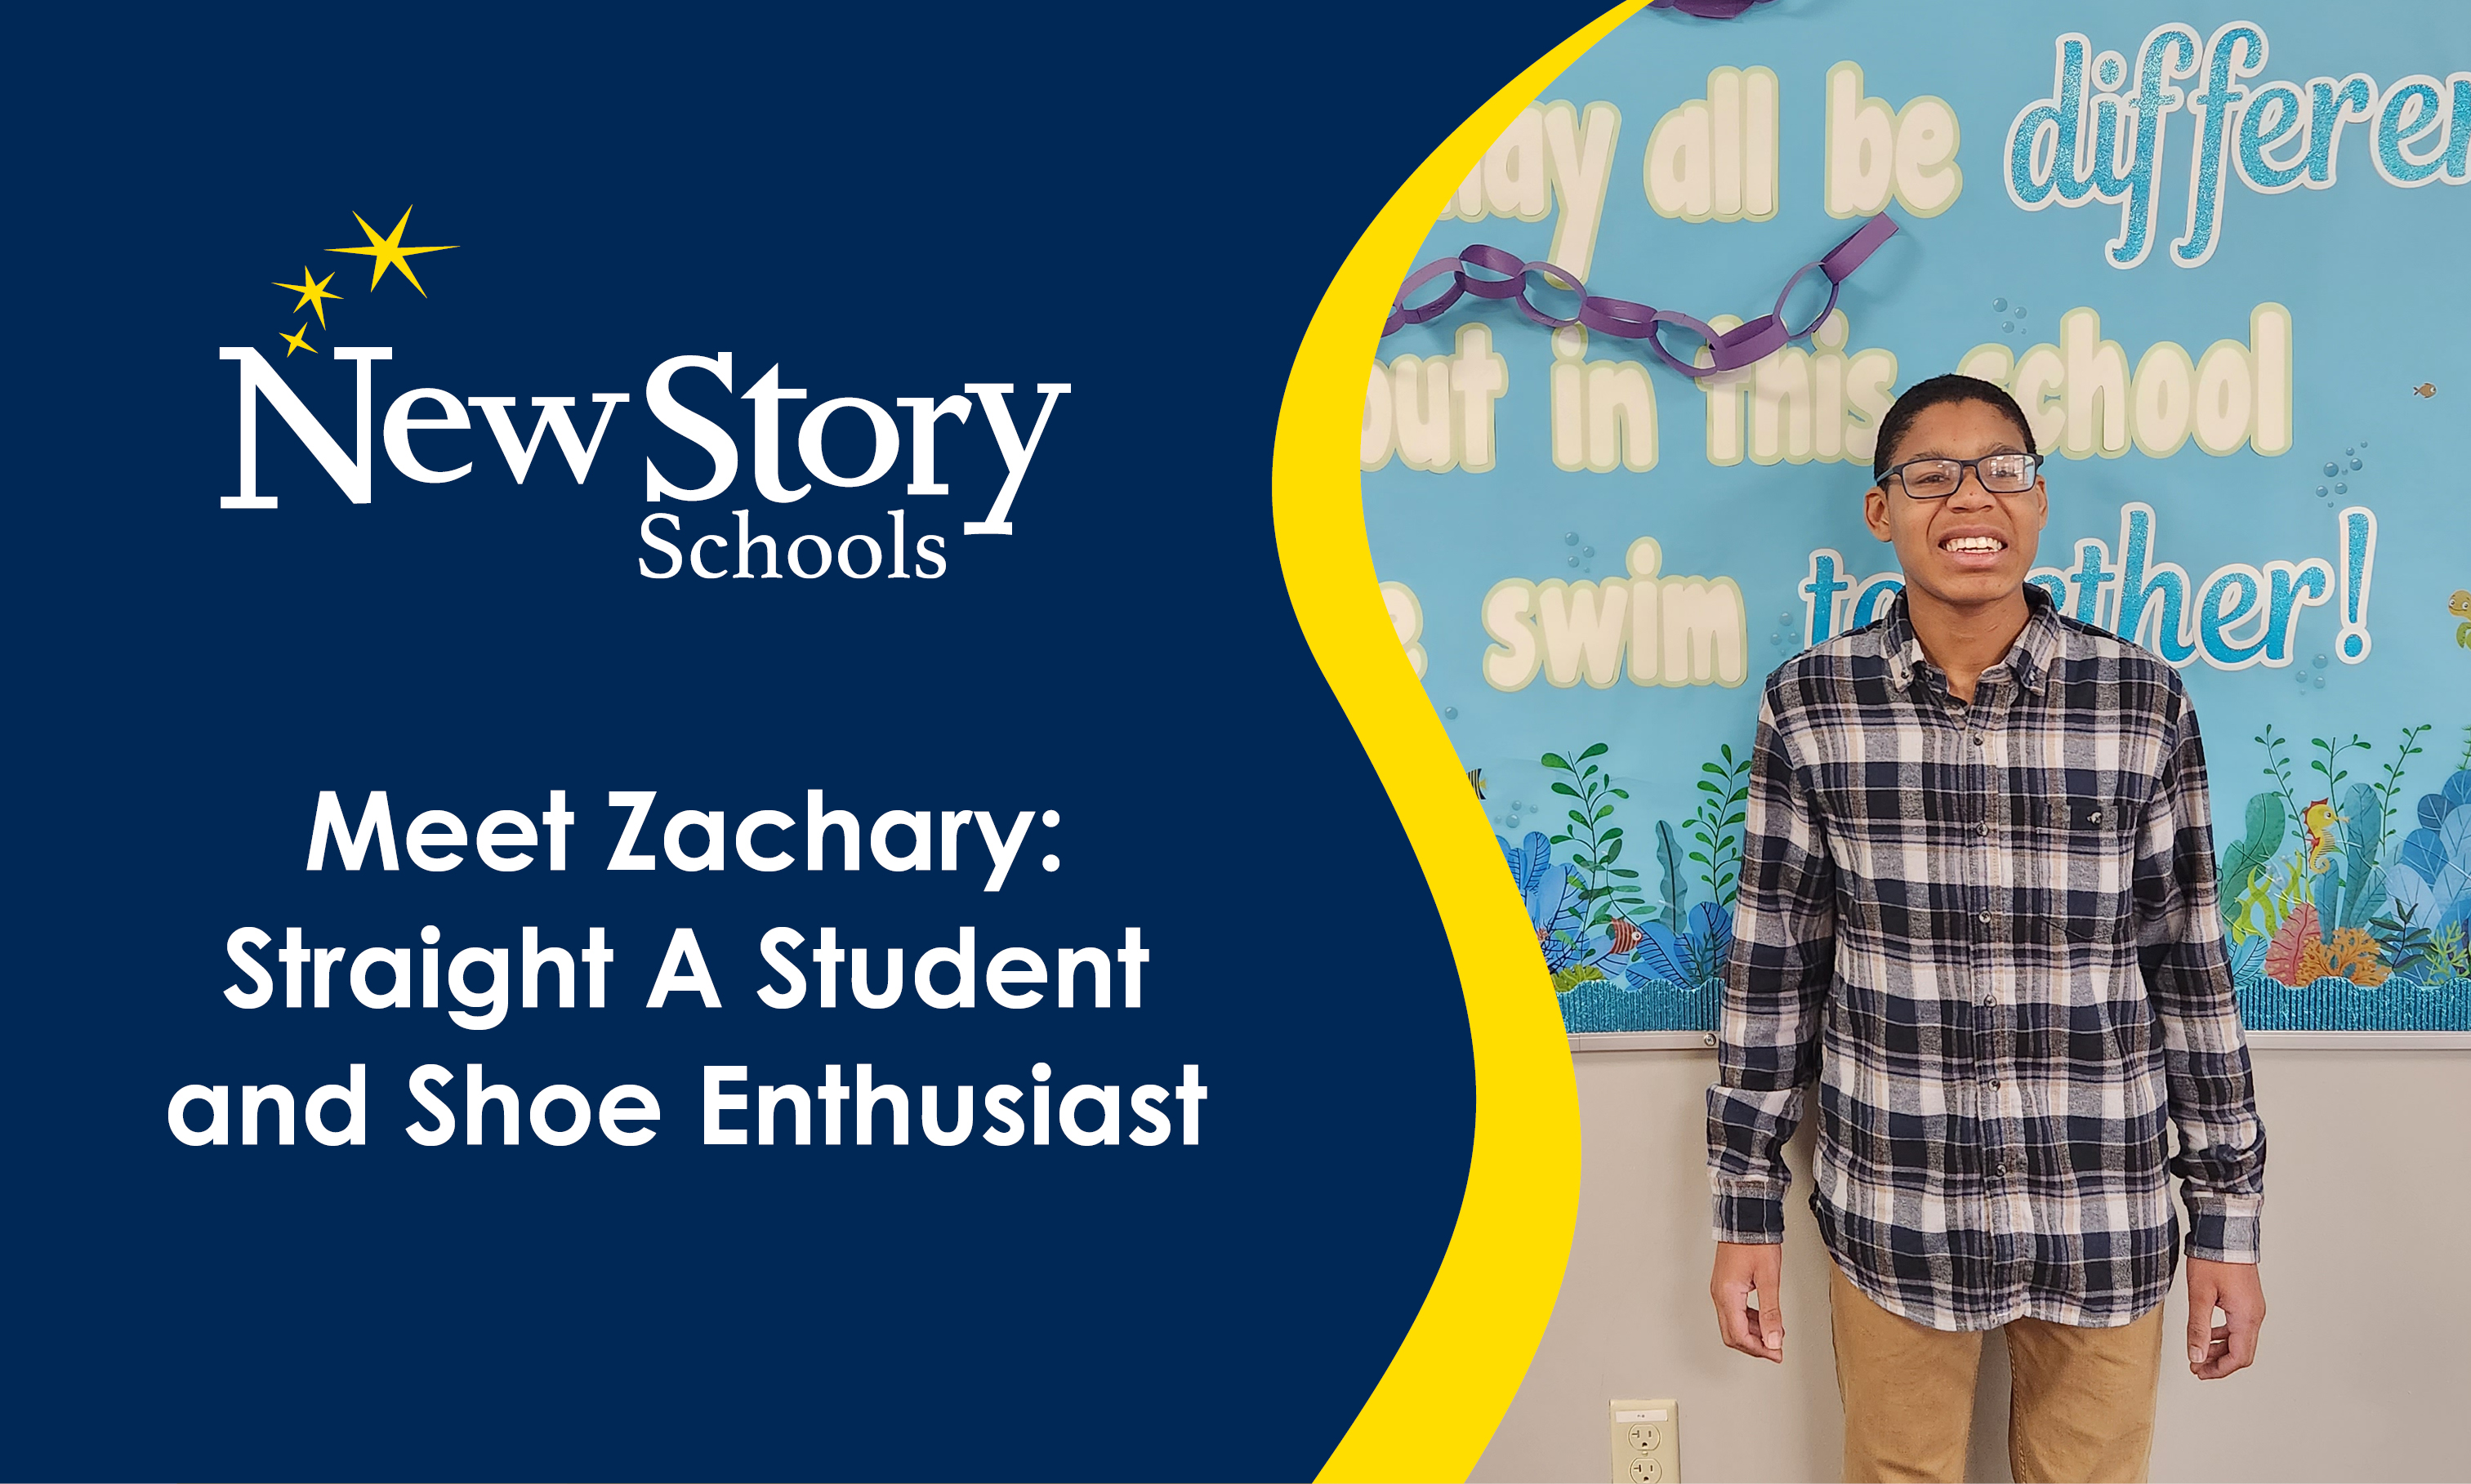 Meet Zachary: Straight A Student and Shoe Enthusiast